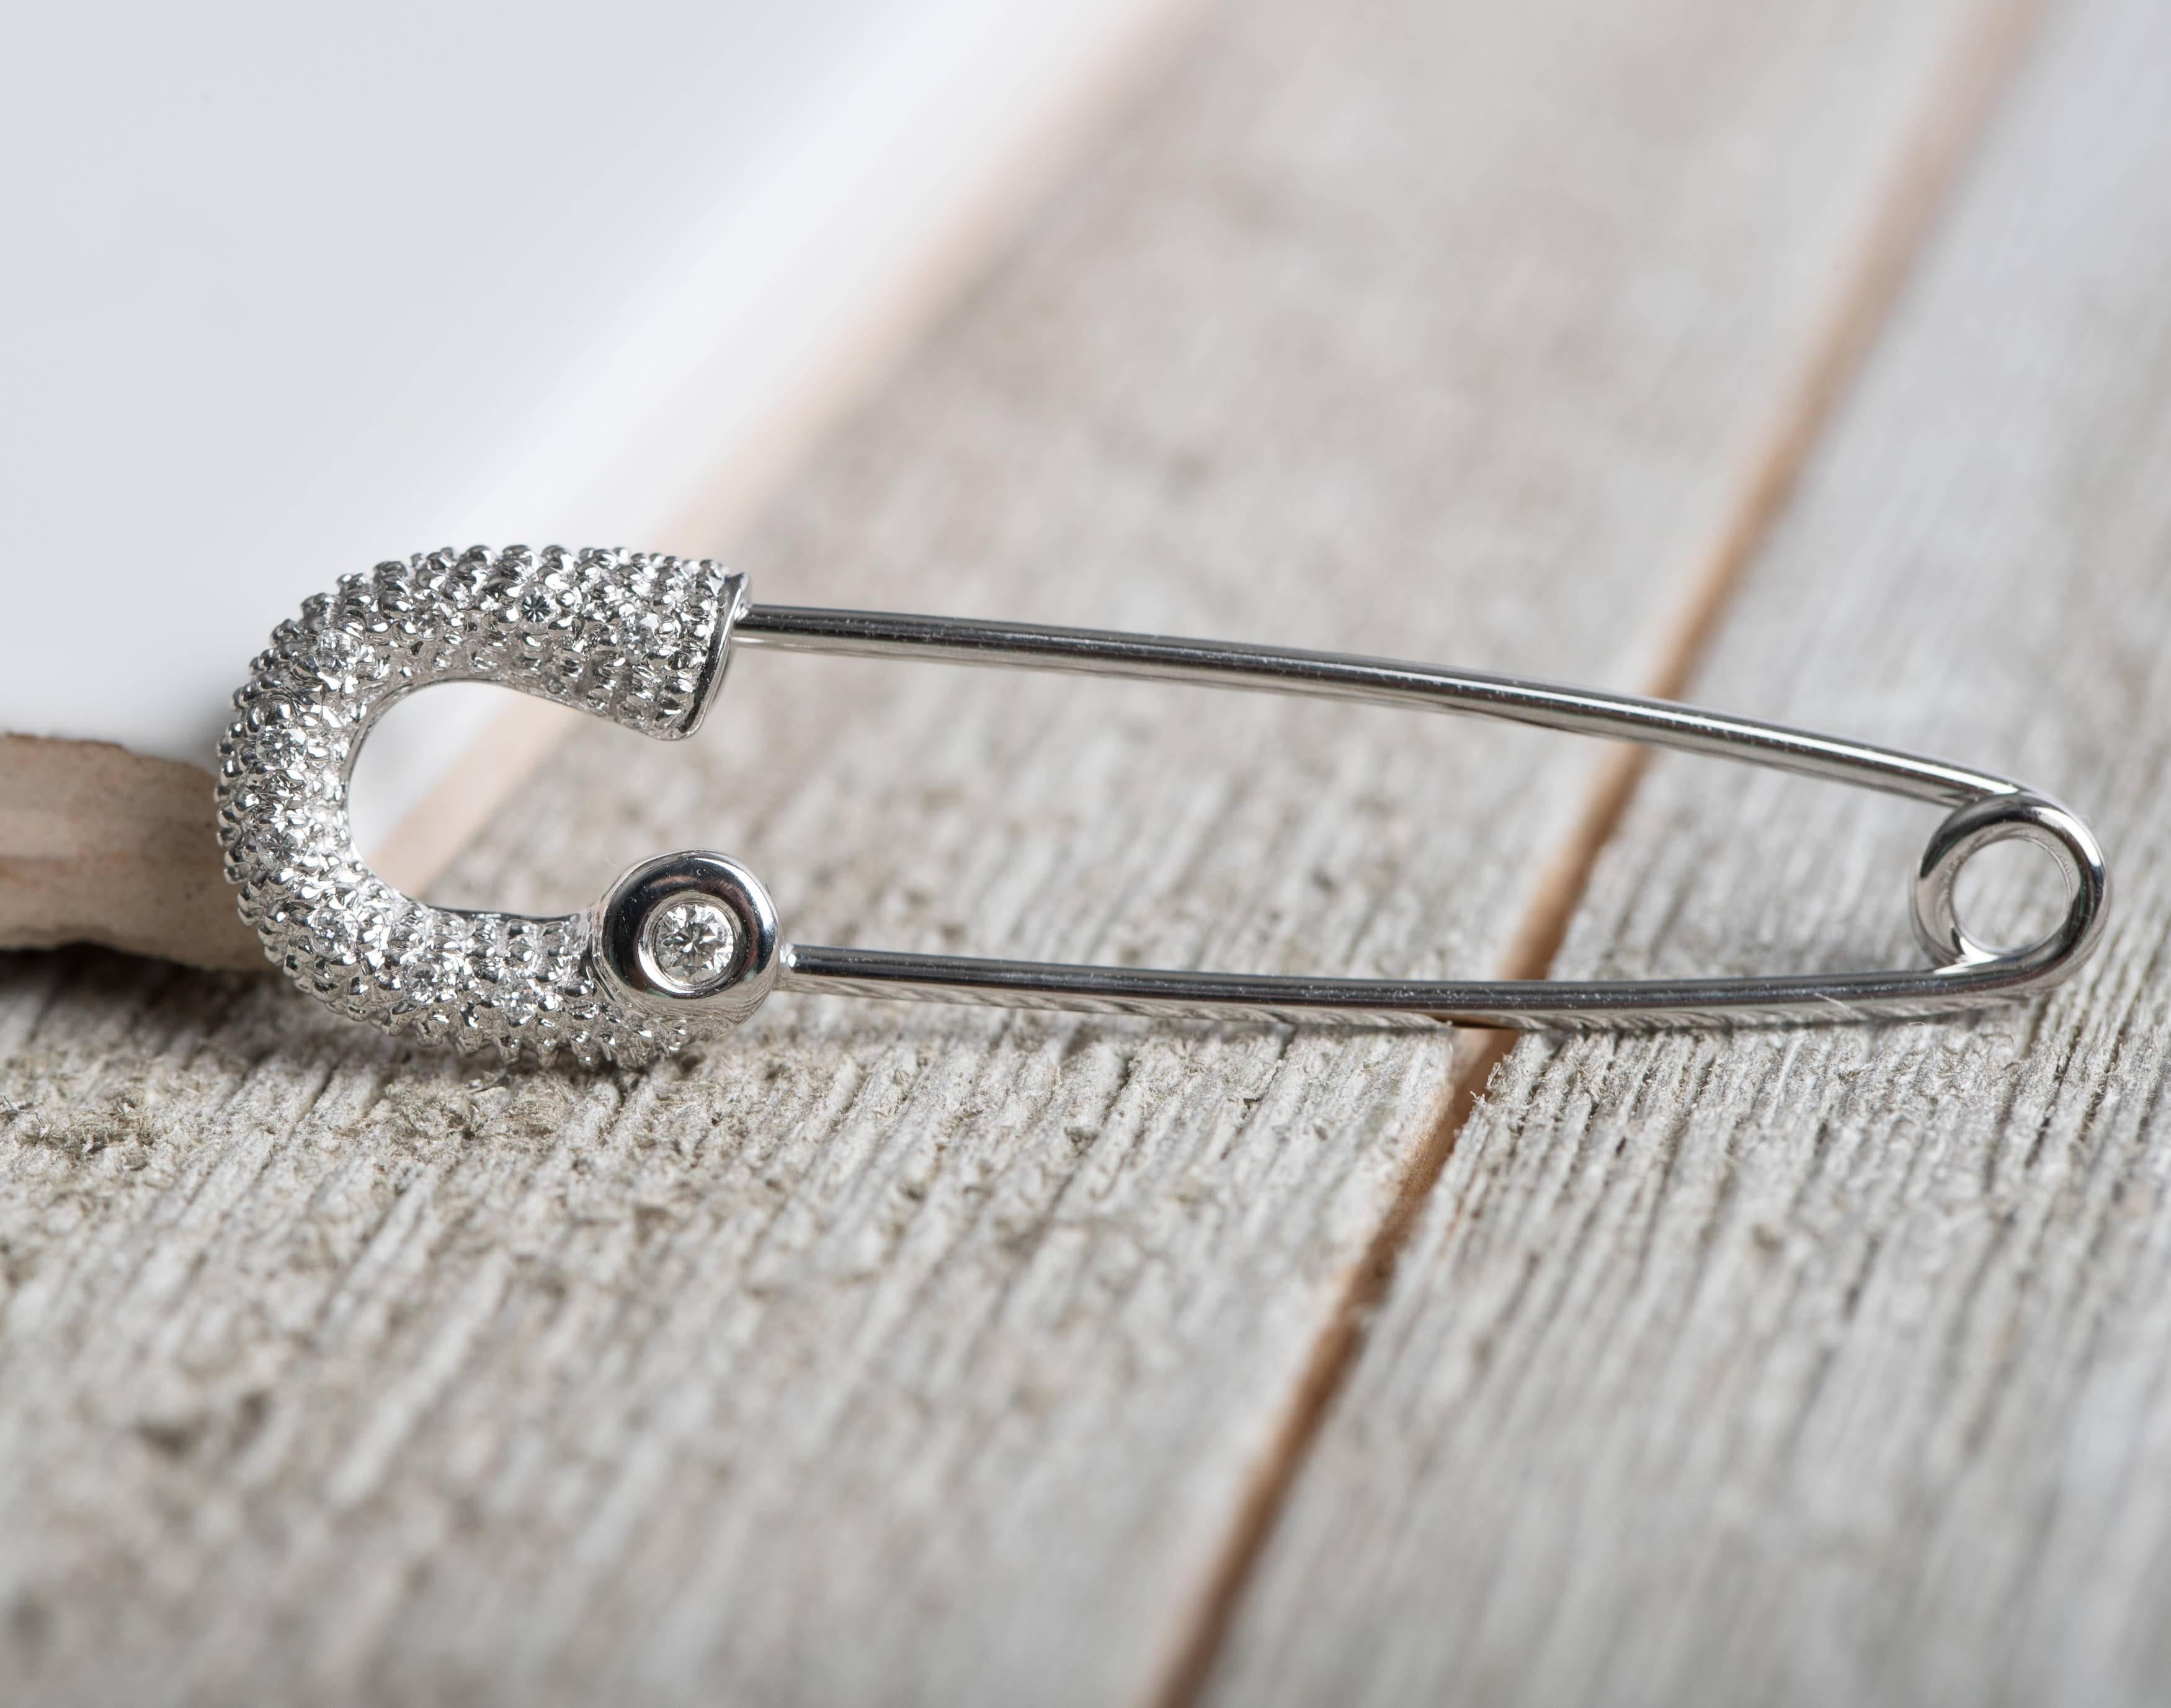 1950s Diaper Pin, Safety Pin - 14 Karat White Gold, Diamonds

Diamond embellished 14 Karat White Gold Safety Pin. Lapel Pin, Brooch, Blouse Pin, Diaper Pin.
This Gorgeous and Clever Gem is as Versatile as it is Beautiful! 

Fully functional, the